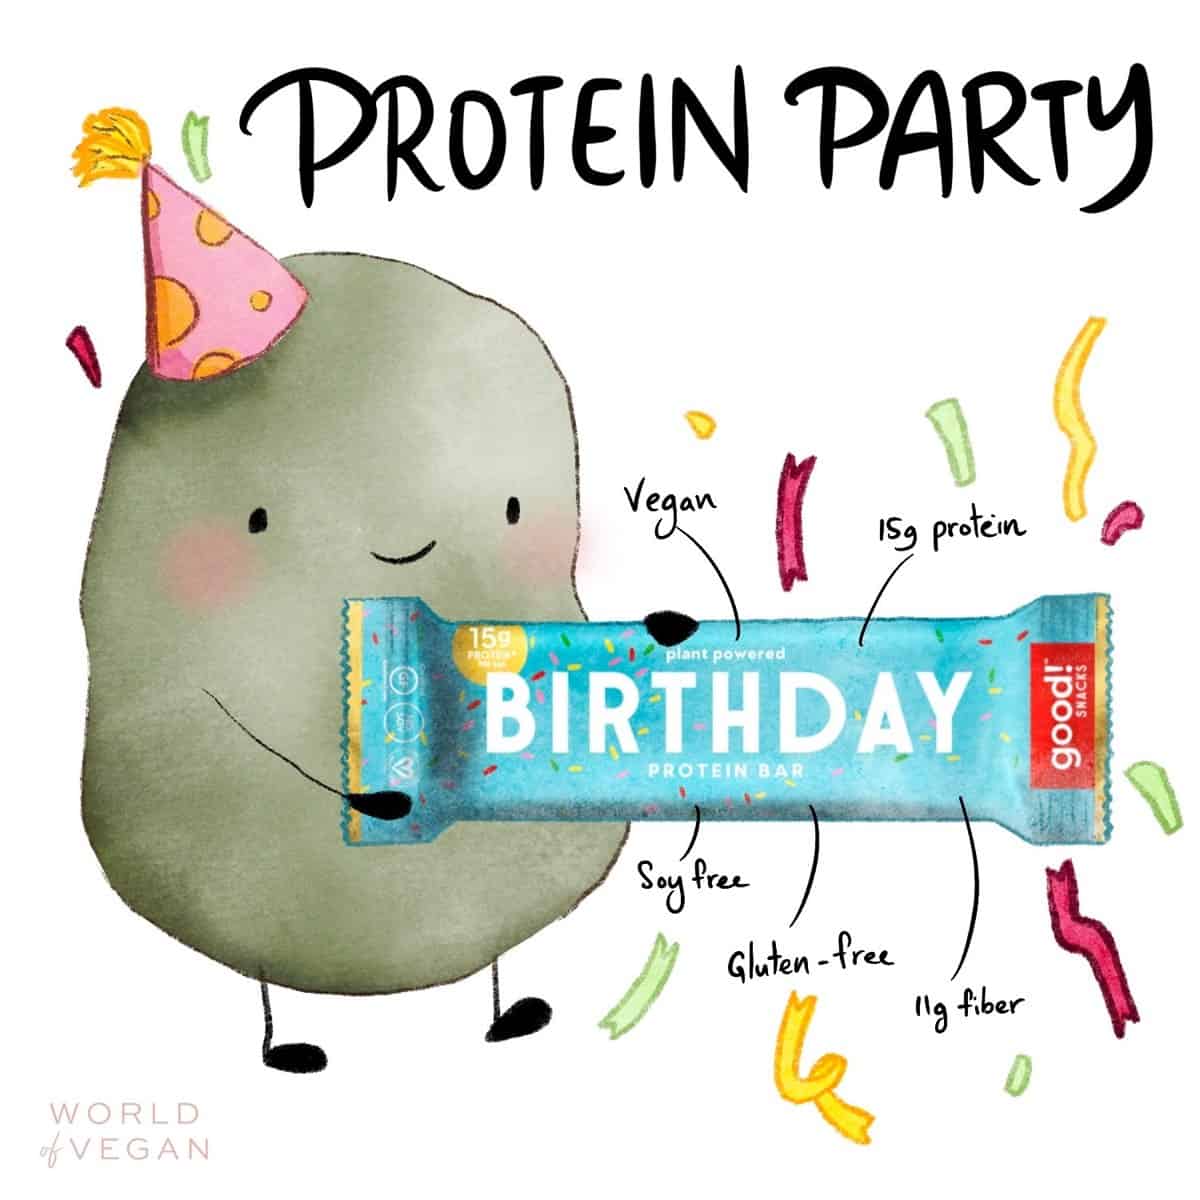 Art illustration showing a fava bean holding up a birthday cake vegan protein bar by good Snacks. 